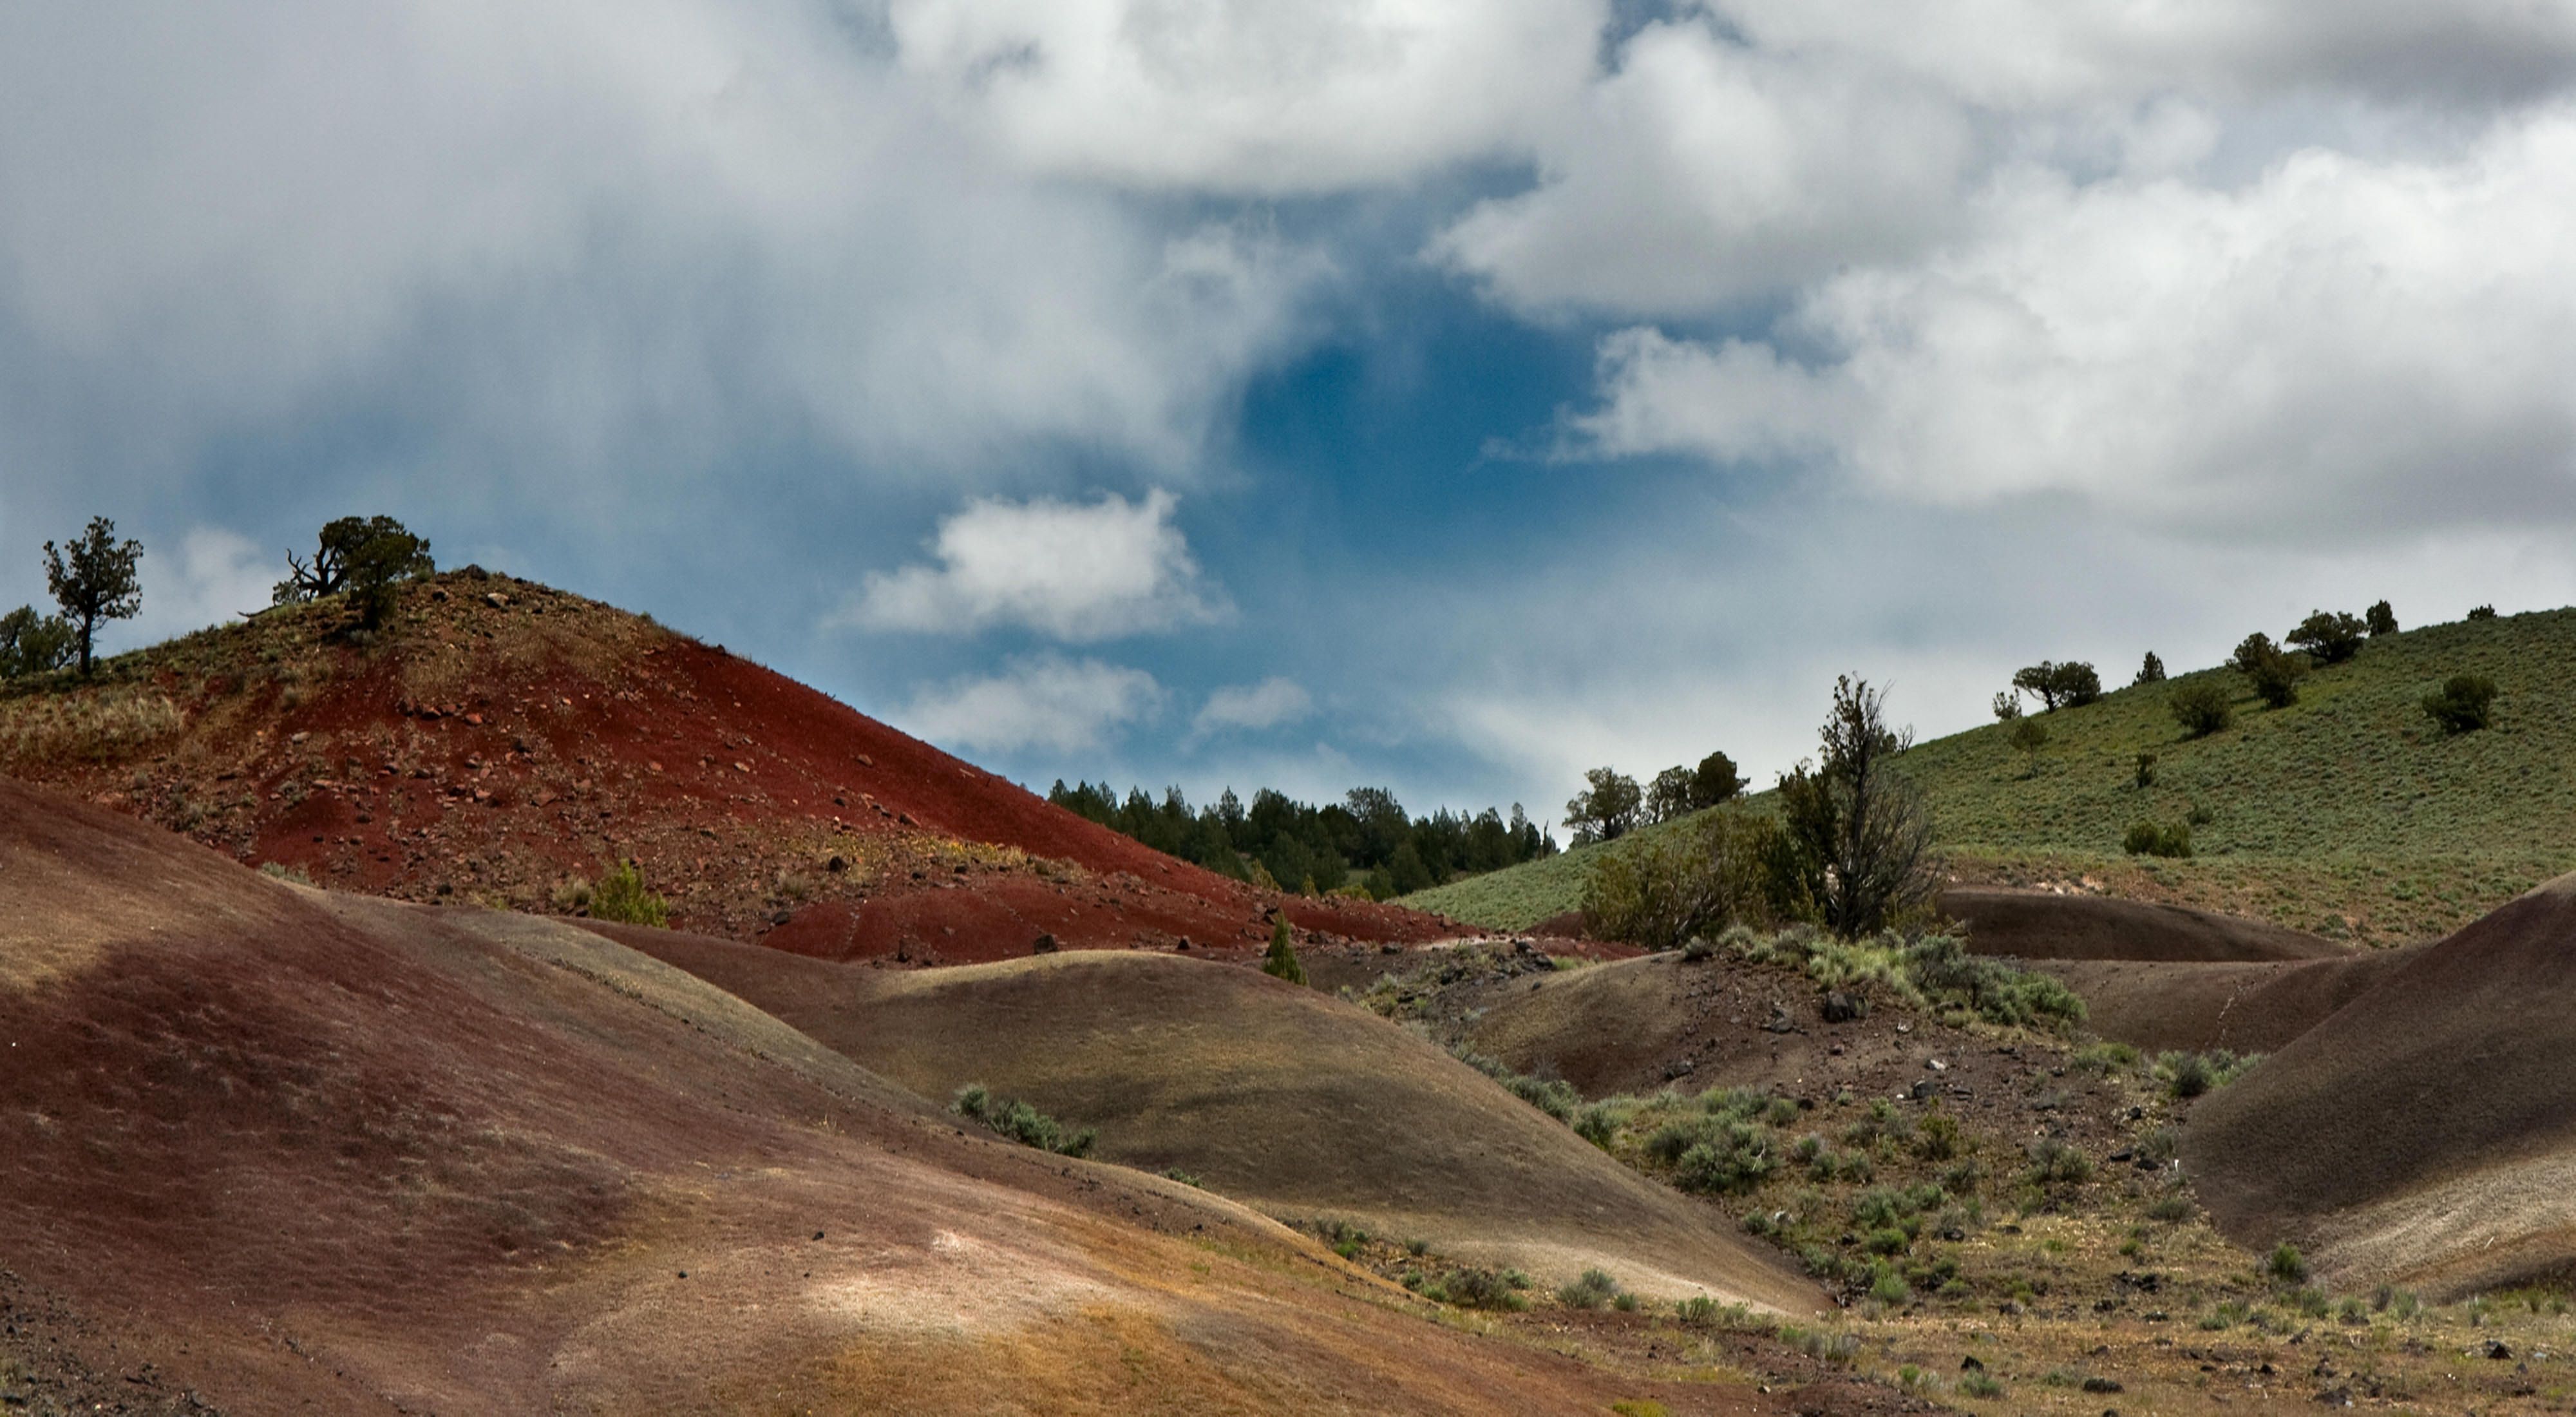 Red, rocky hills with scrubby vegetation.